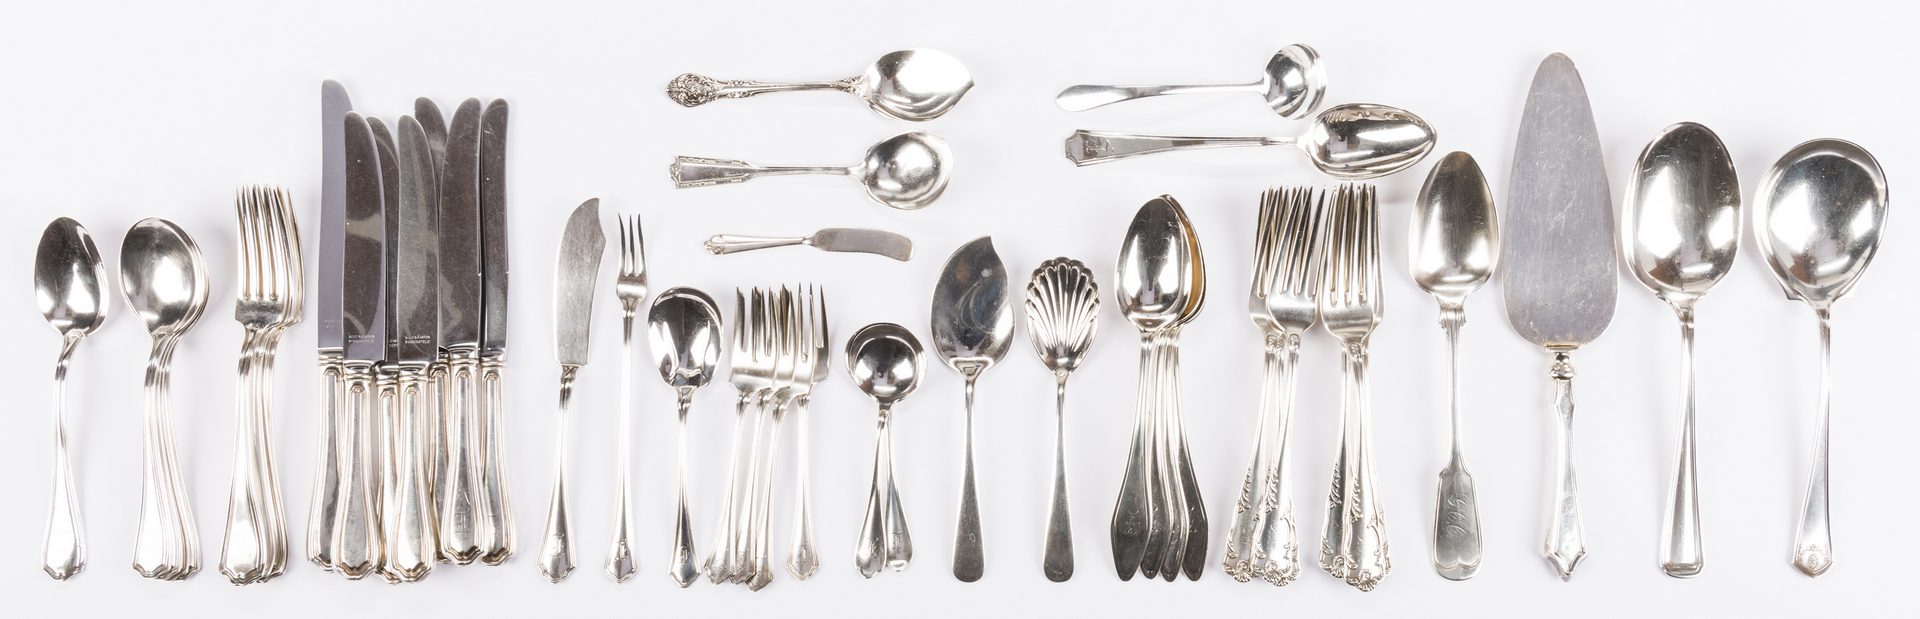 Lot 548: 48 pcs Assorted Sterling and Coin Silver Flatware